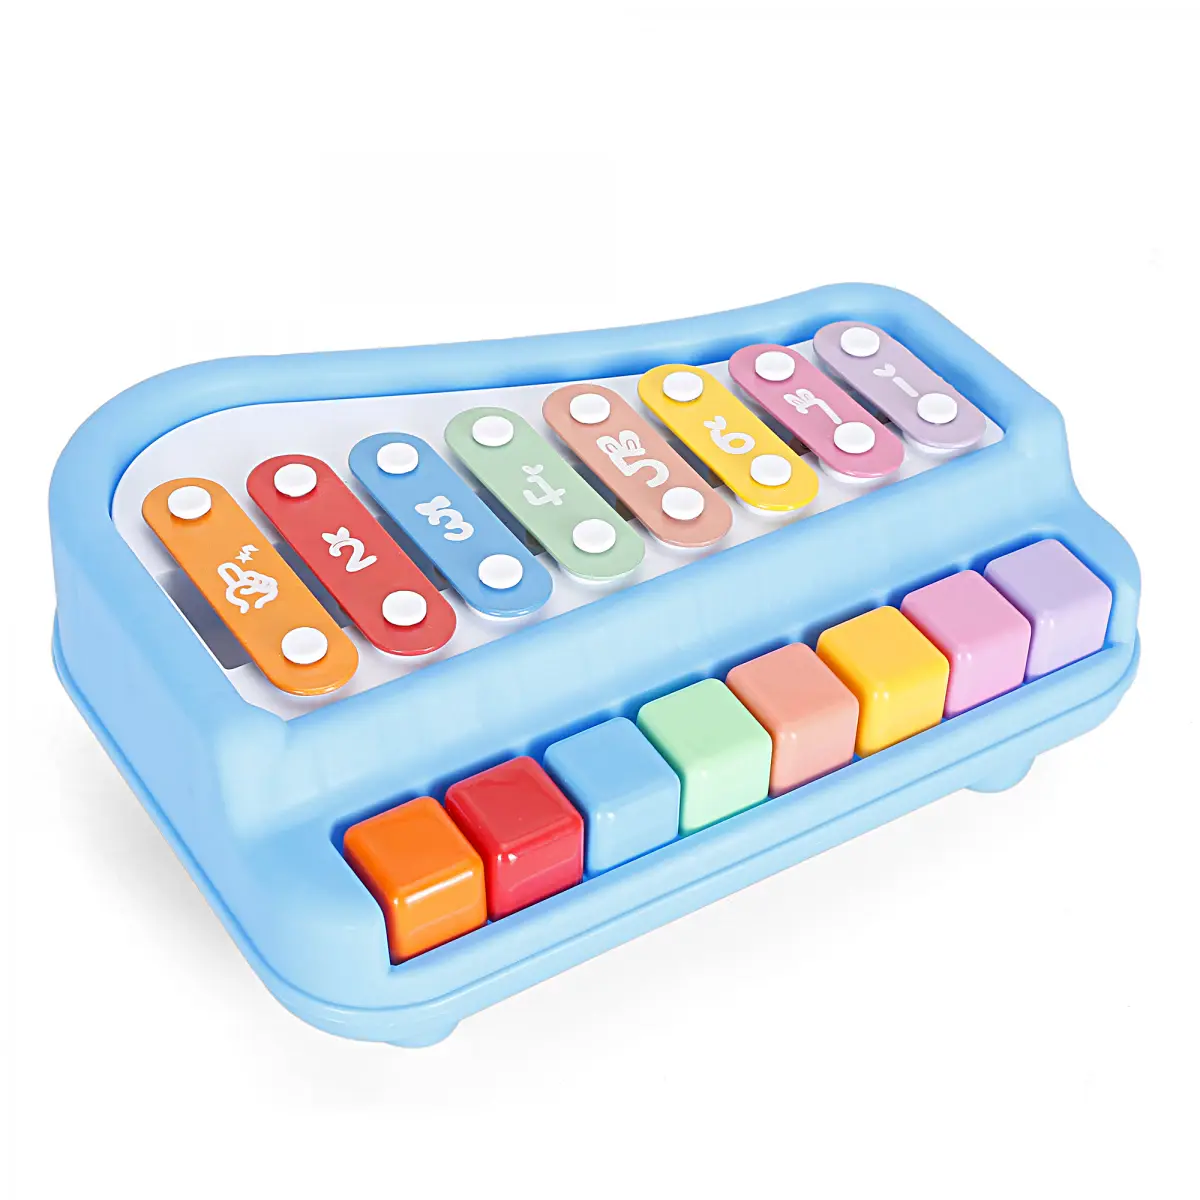 Shooting Star My Melodious Xylophone for Kids, 18M+, Blue